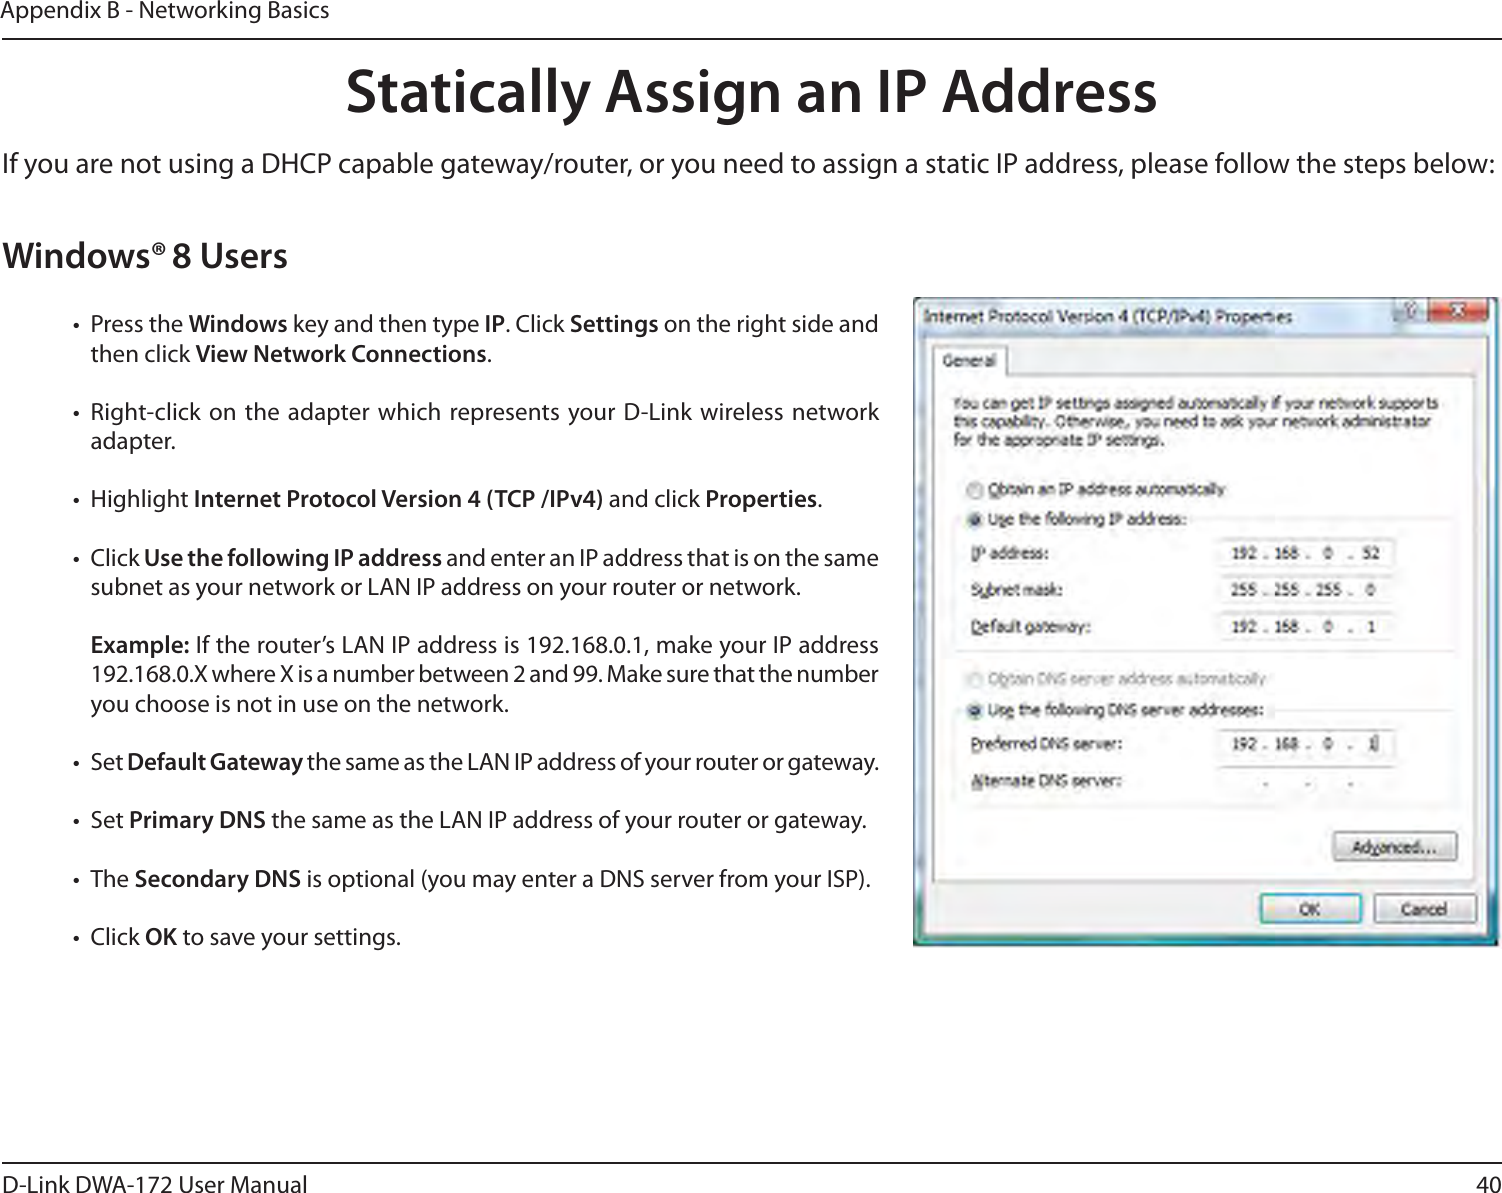 40D-Link DWA-172 User ManualAppendix B - Networking BasicsStatically Assign an IP AddressIf you are not using a DHCP capable gateway/router, or you need to assign a static IP address, please follow the steps below:Windows® 8 Users•  Press the Windows key and then type IP. Click Settings on the right side and then click View Network Connections. • Right-click on the adapter which represents your D-Link wireless network adapter.• Highlight Internet Protocol Version 4 (TCP /IPv4) and click Properties.• Click Use the following IP address and enter an IP address that is on the same subnet as your network or LAN IP address on your router or network. Example: If the router’s LAN IP address is 192.168.0.1, make your IP address 192.168.0.X where X is a number between 2 and 99. Make sure that the number you choose is not in use on the network. • Set Default Gateway the same as the LAN IP address of your router or gateway.• Set Primary DNS the same as the LAN IP address of your router or gateway. • The Secondary DNS is optional (you may enter a DNS server from your ISP).• Click OK to save your settings.